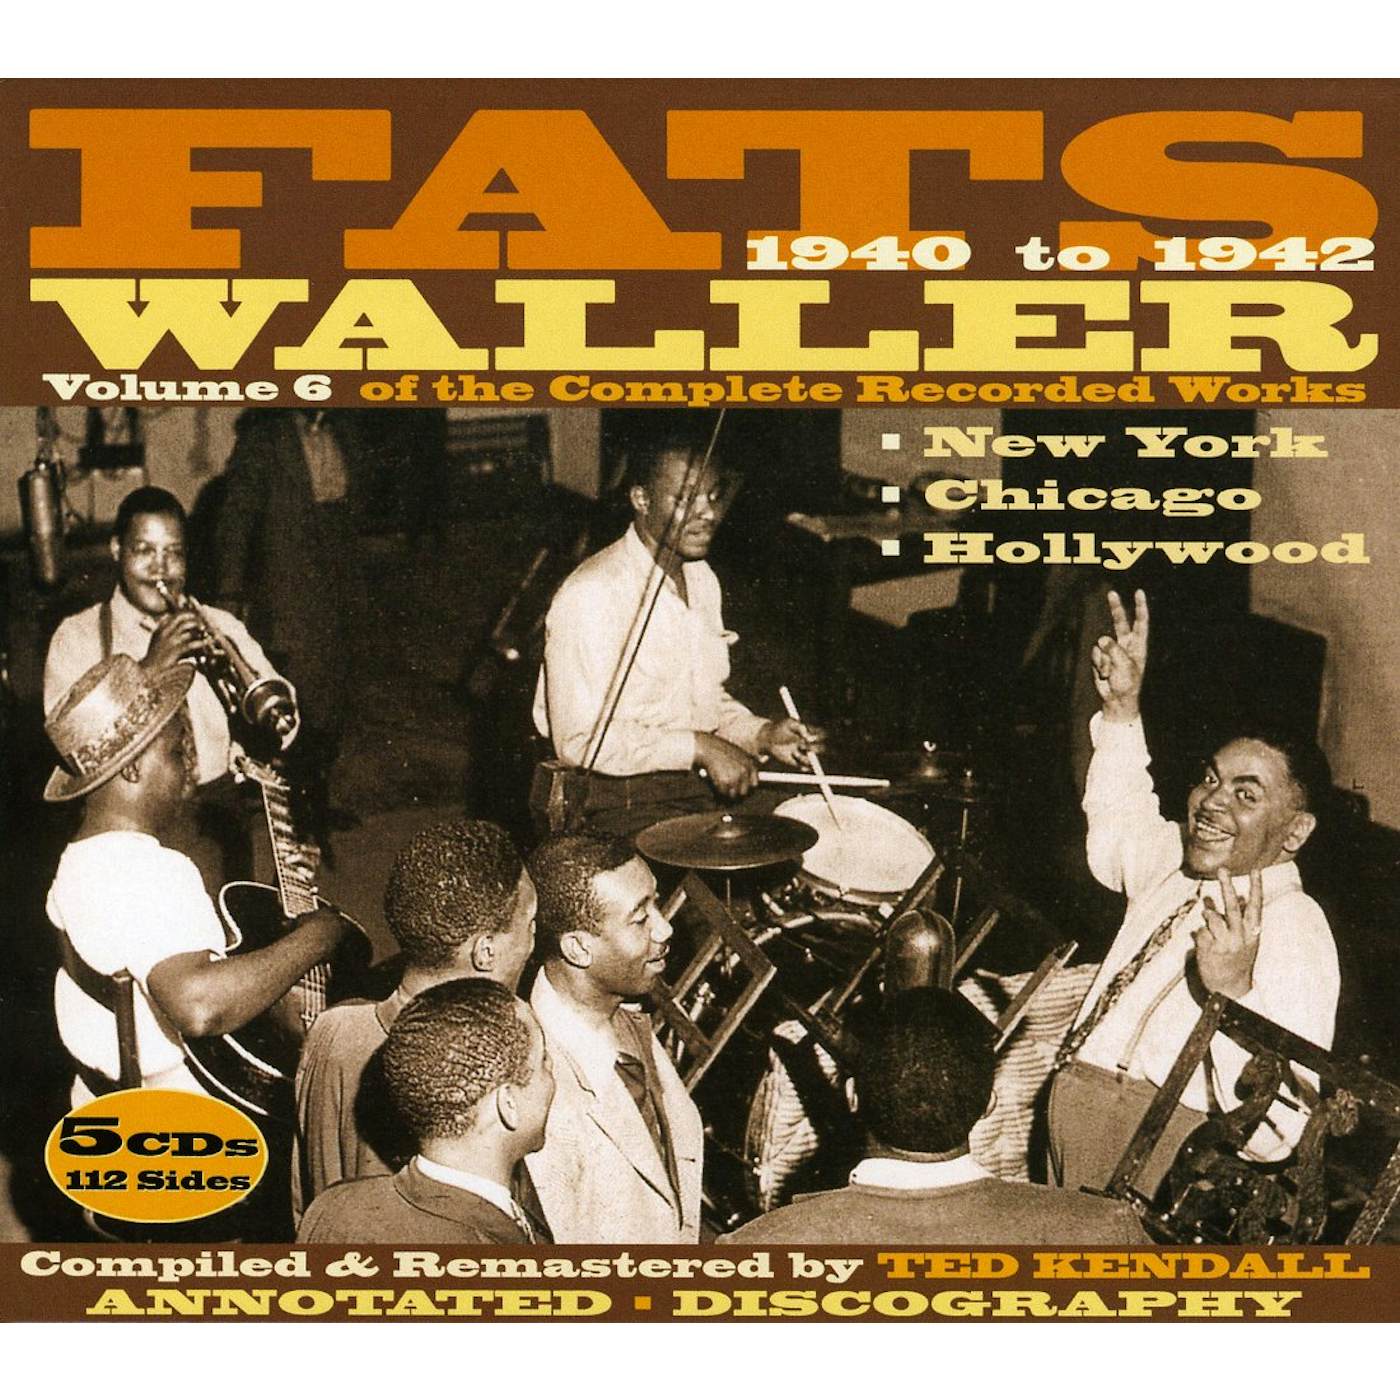 Fats Waller 1940 TO 1942 6 OF THE COMPLETE RECORDED WORKS CD